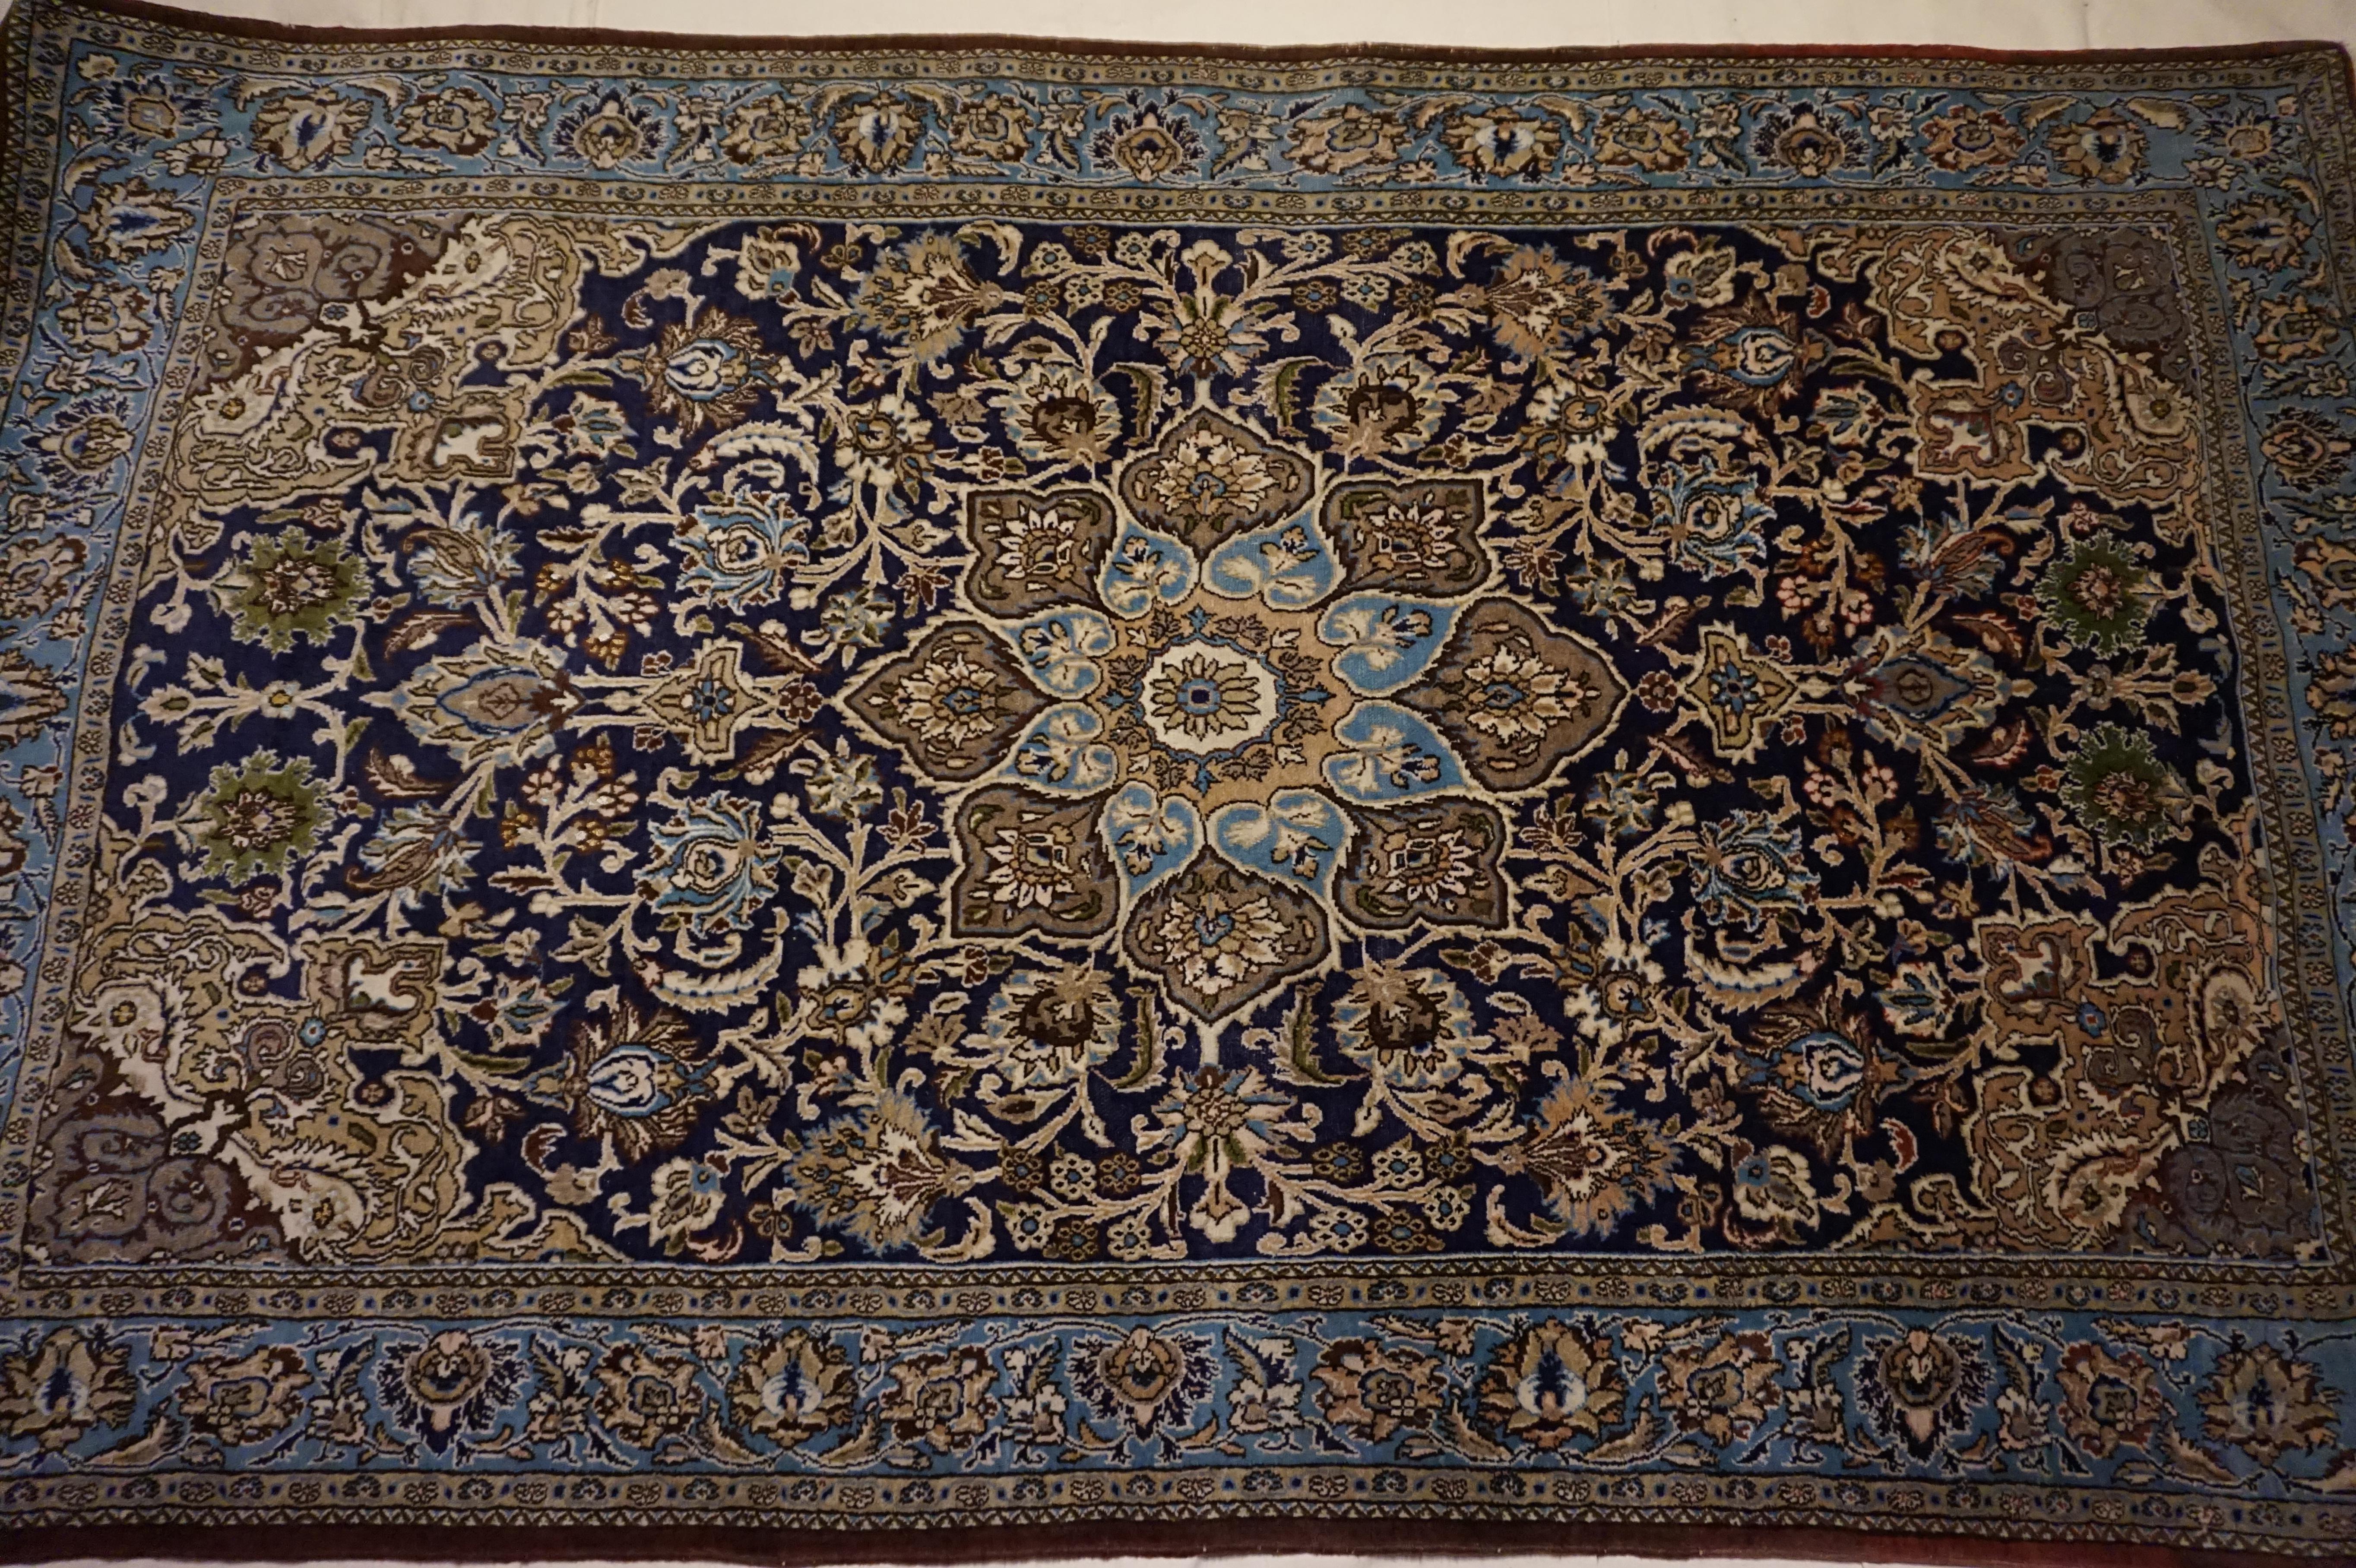 Antique Kashmir Kashan Rug Hand-knotted In Pure Wool In Indigo, Blues & Browns For Sale 2